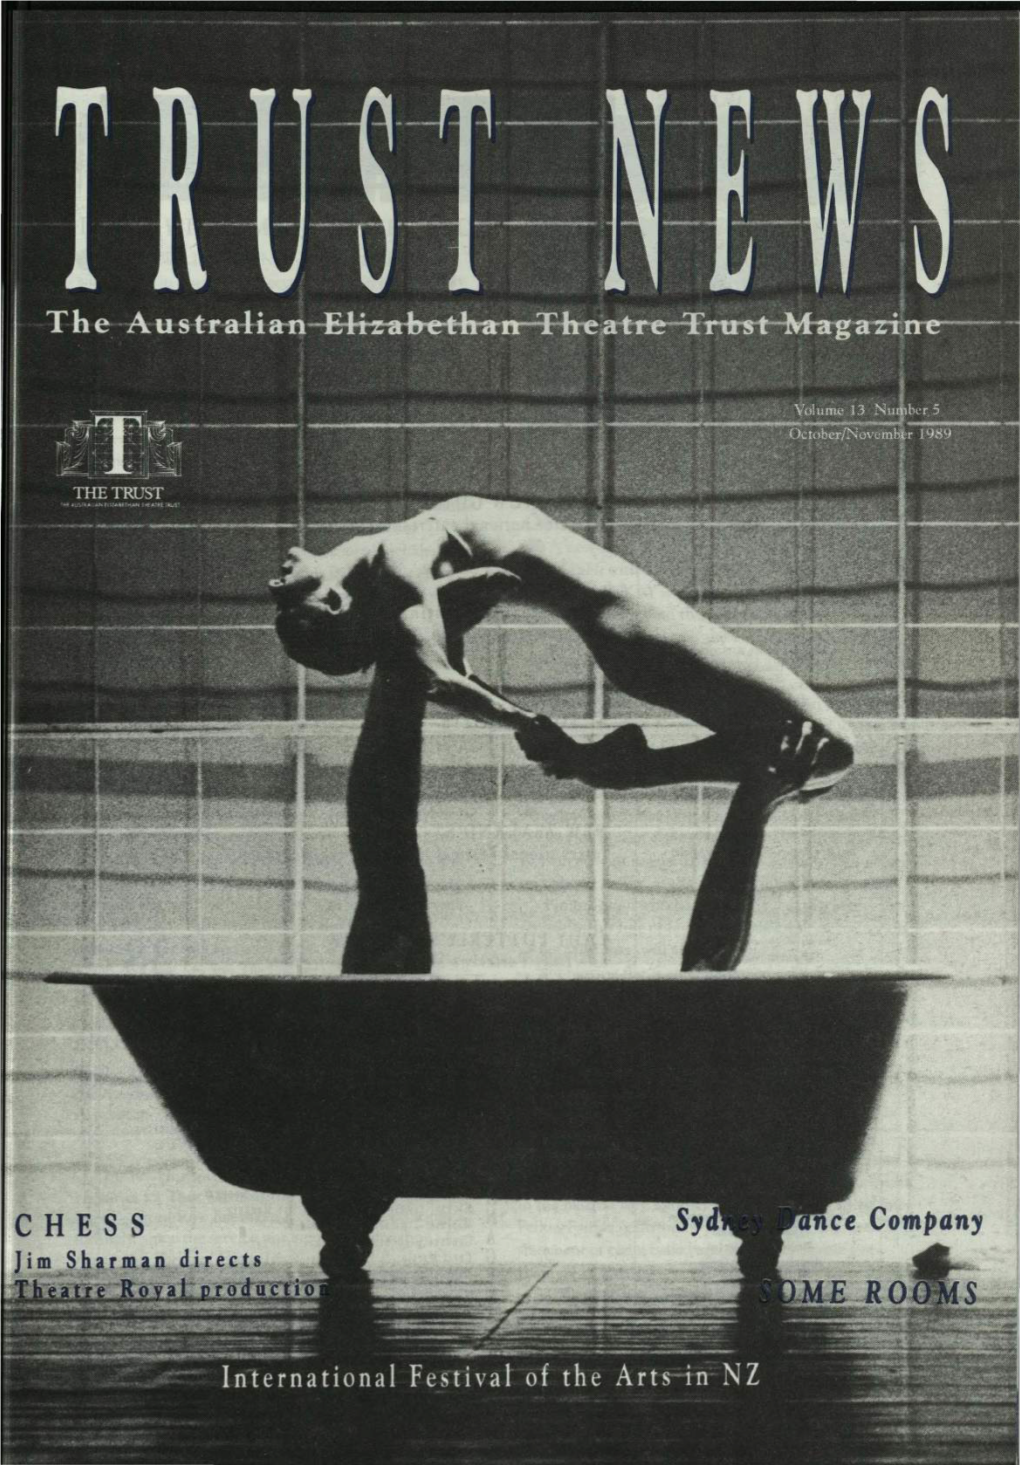 TRUST NEWS Is a Publication of the AUSTRALIAN ELIZABETHAN to THEATRE TRUST N Sid E (Incorporated in [H E ACT)